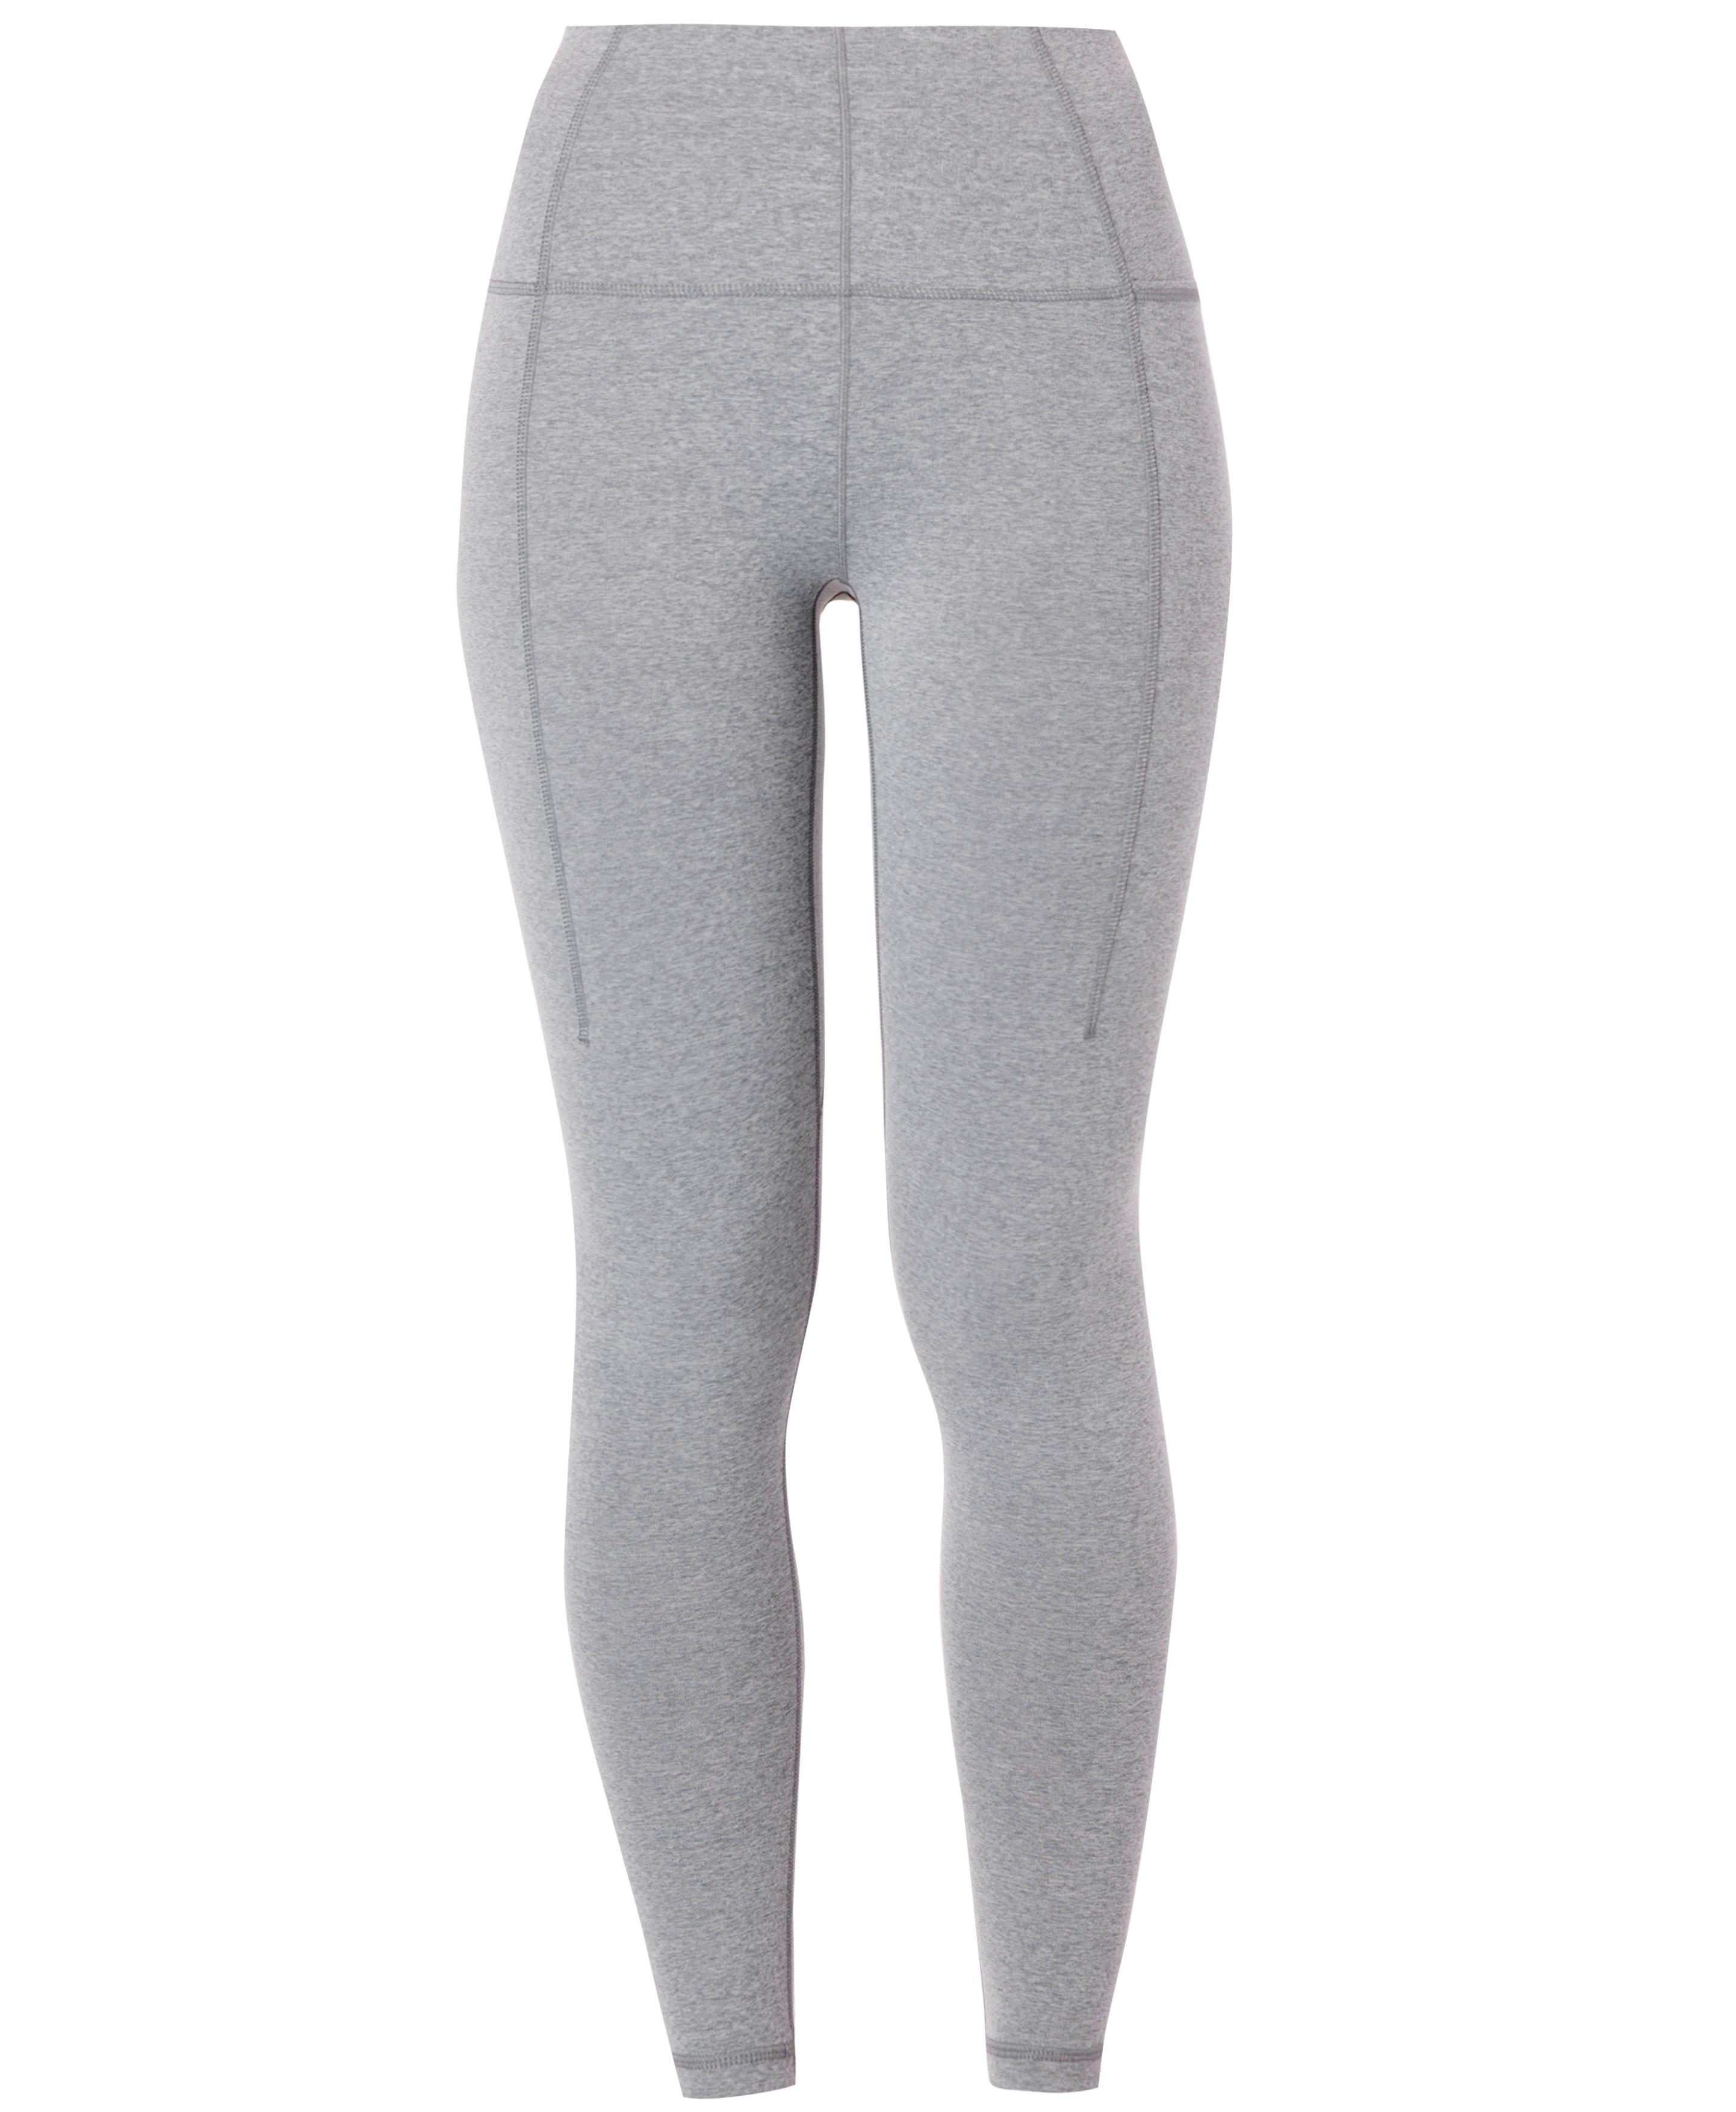 Shascullfites Melody Gray Leggings Yoga Pants Shapewear Leggings Online  Ladies Gym Leggings for Tall Women – the best products in the Joom Geek  online store